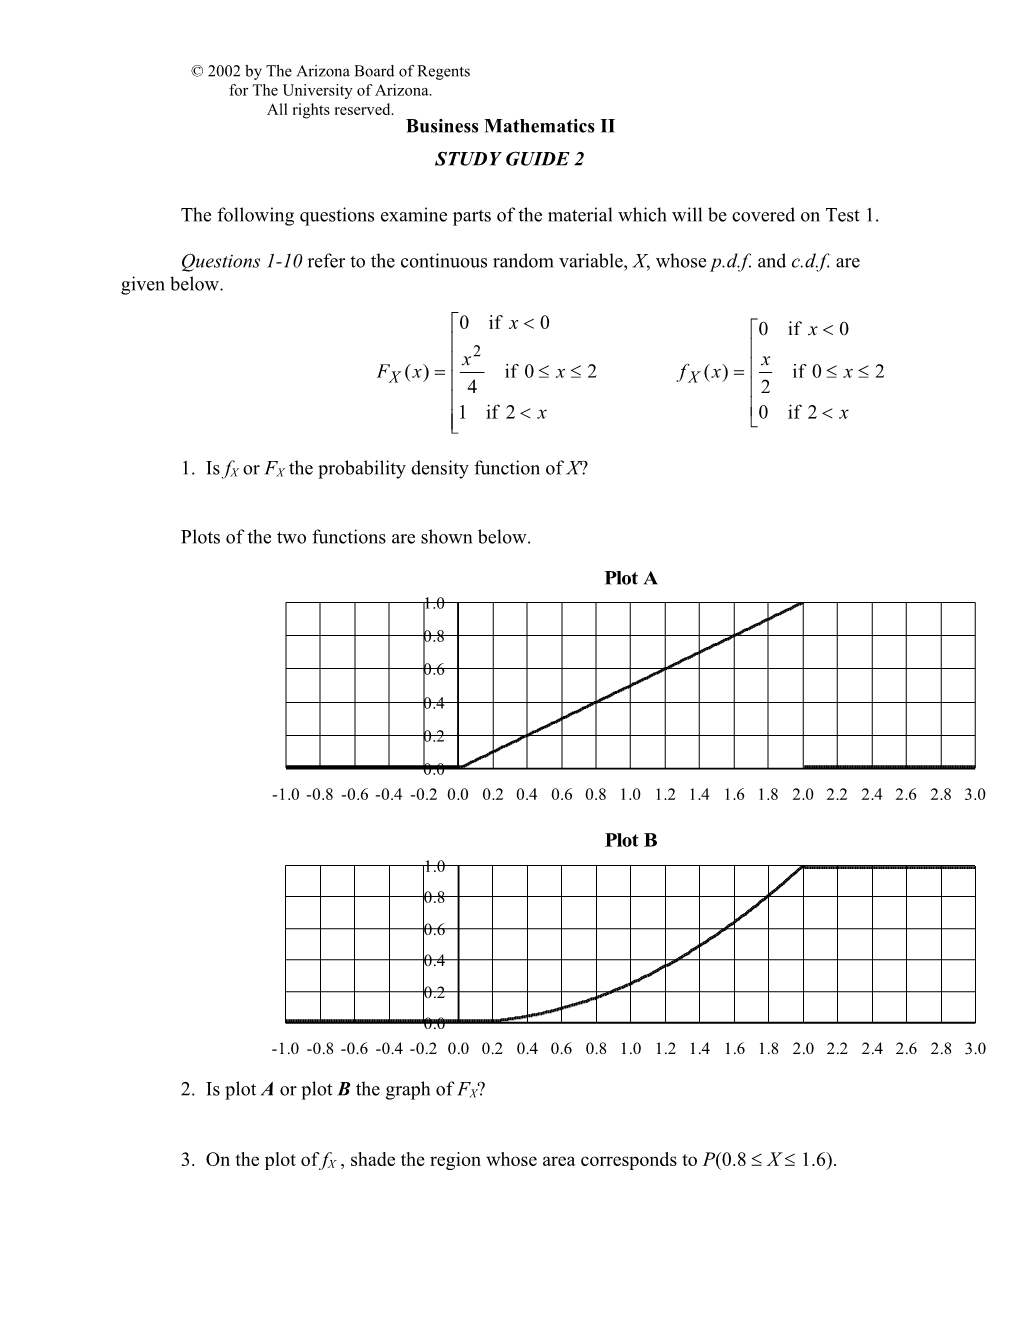 Study Guide for Business Mathematics II, Test 2: Page 1